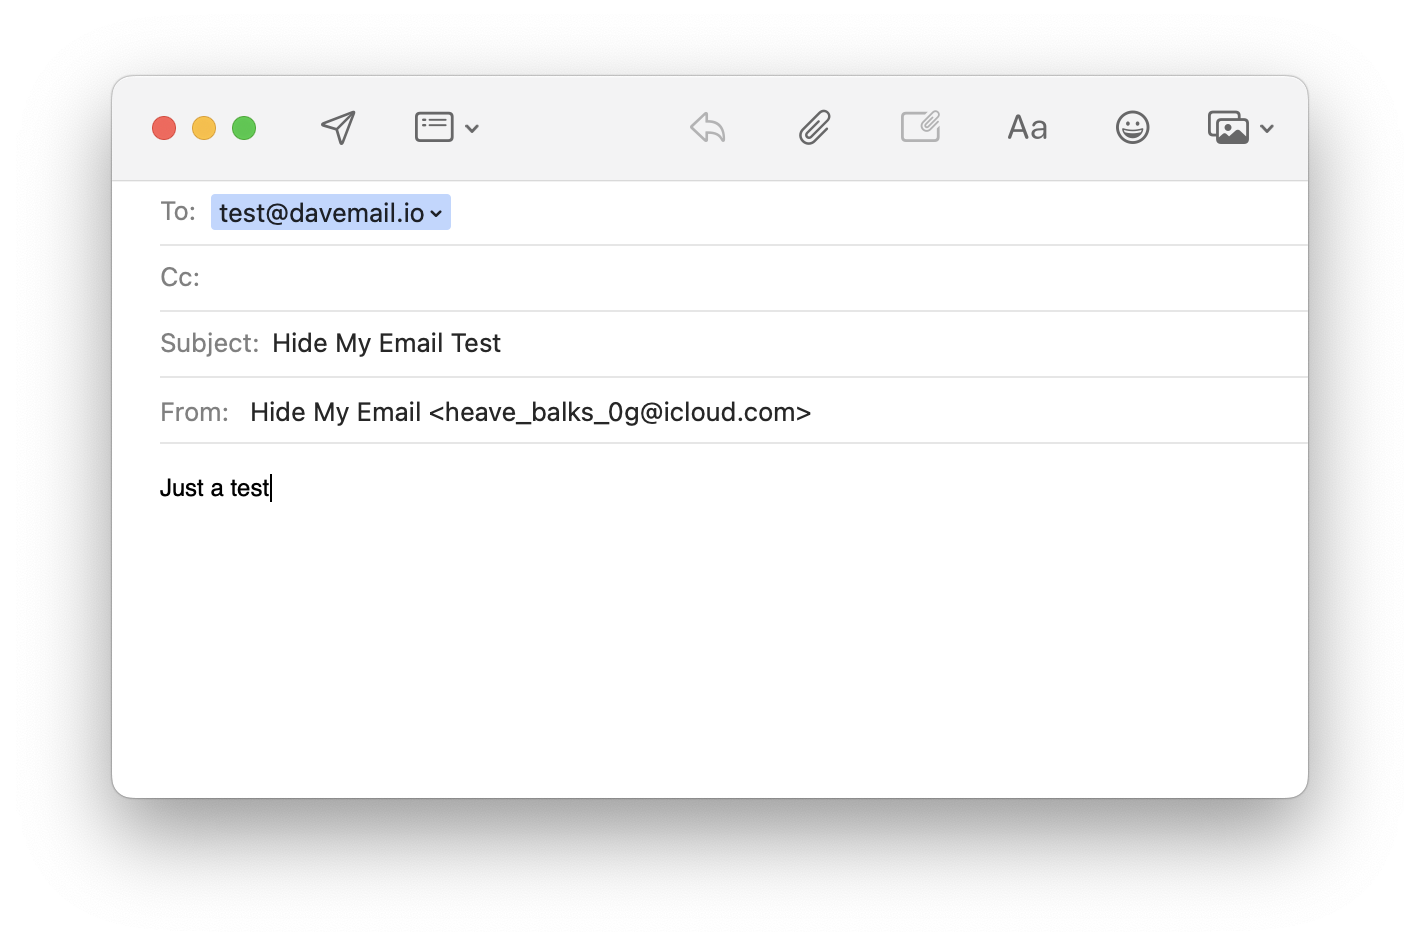 New email with Hide My Email